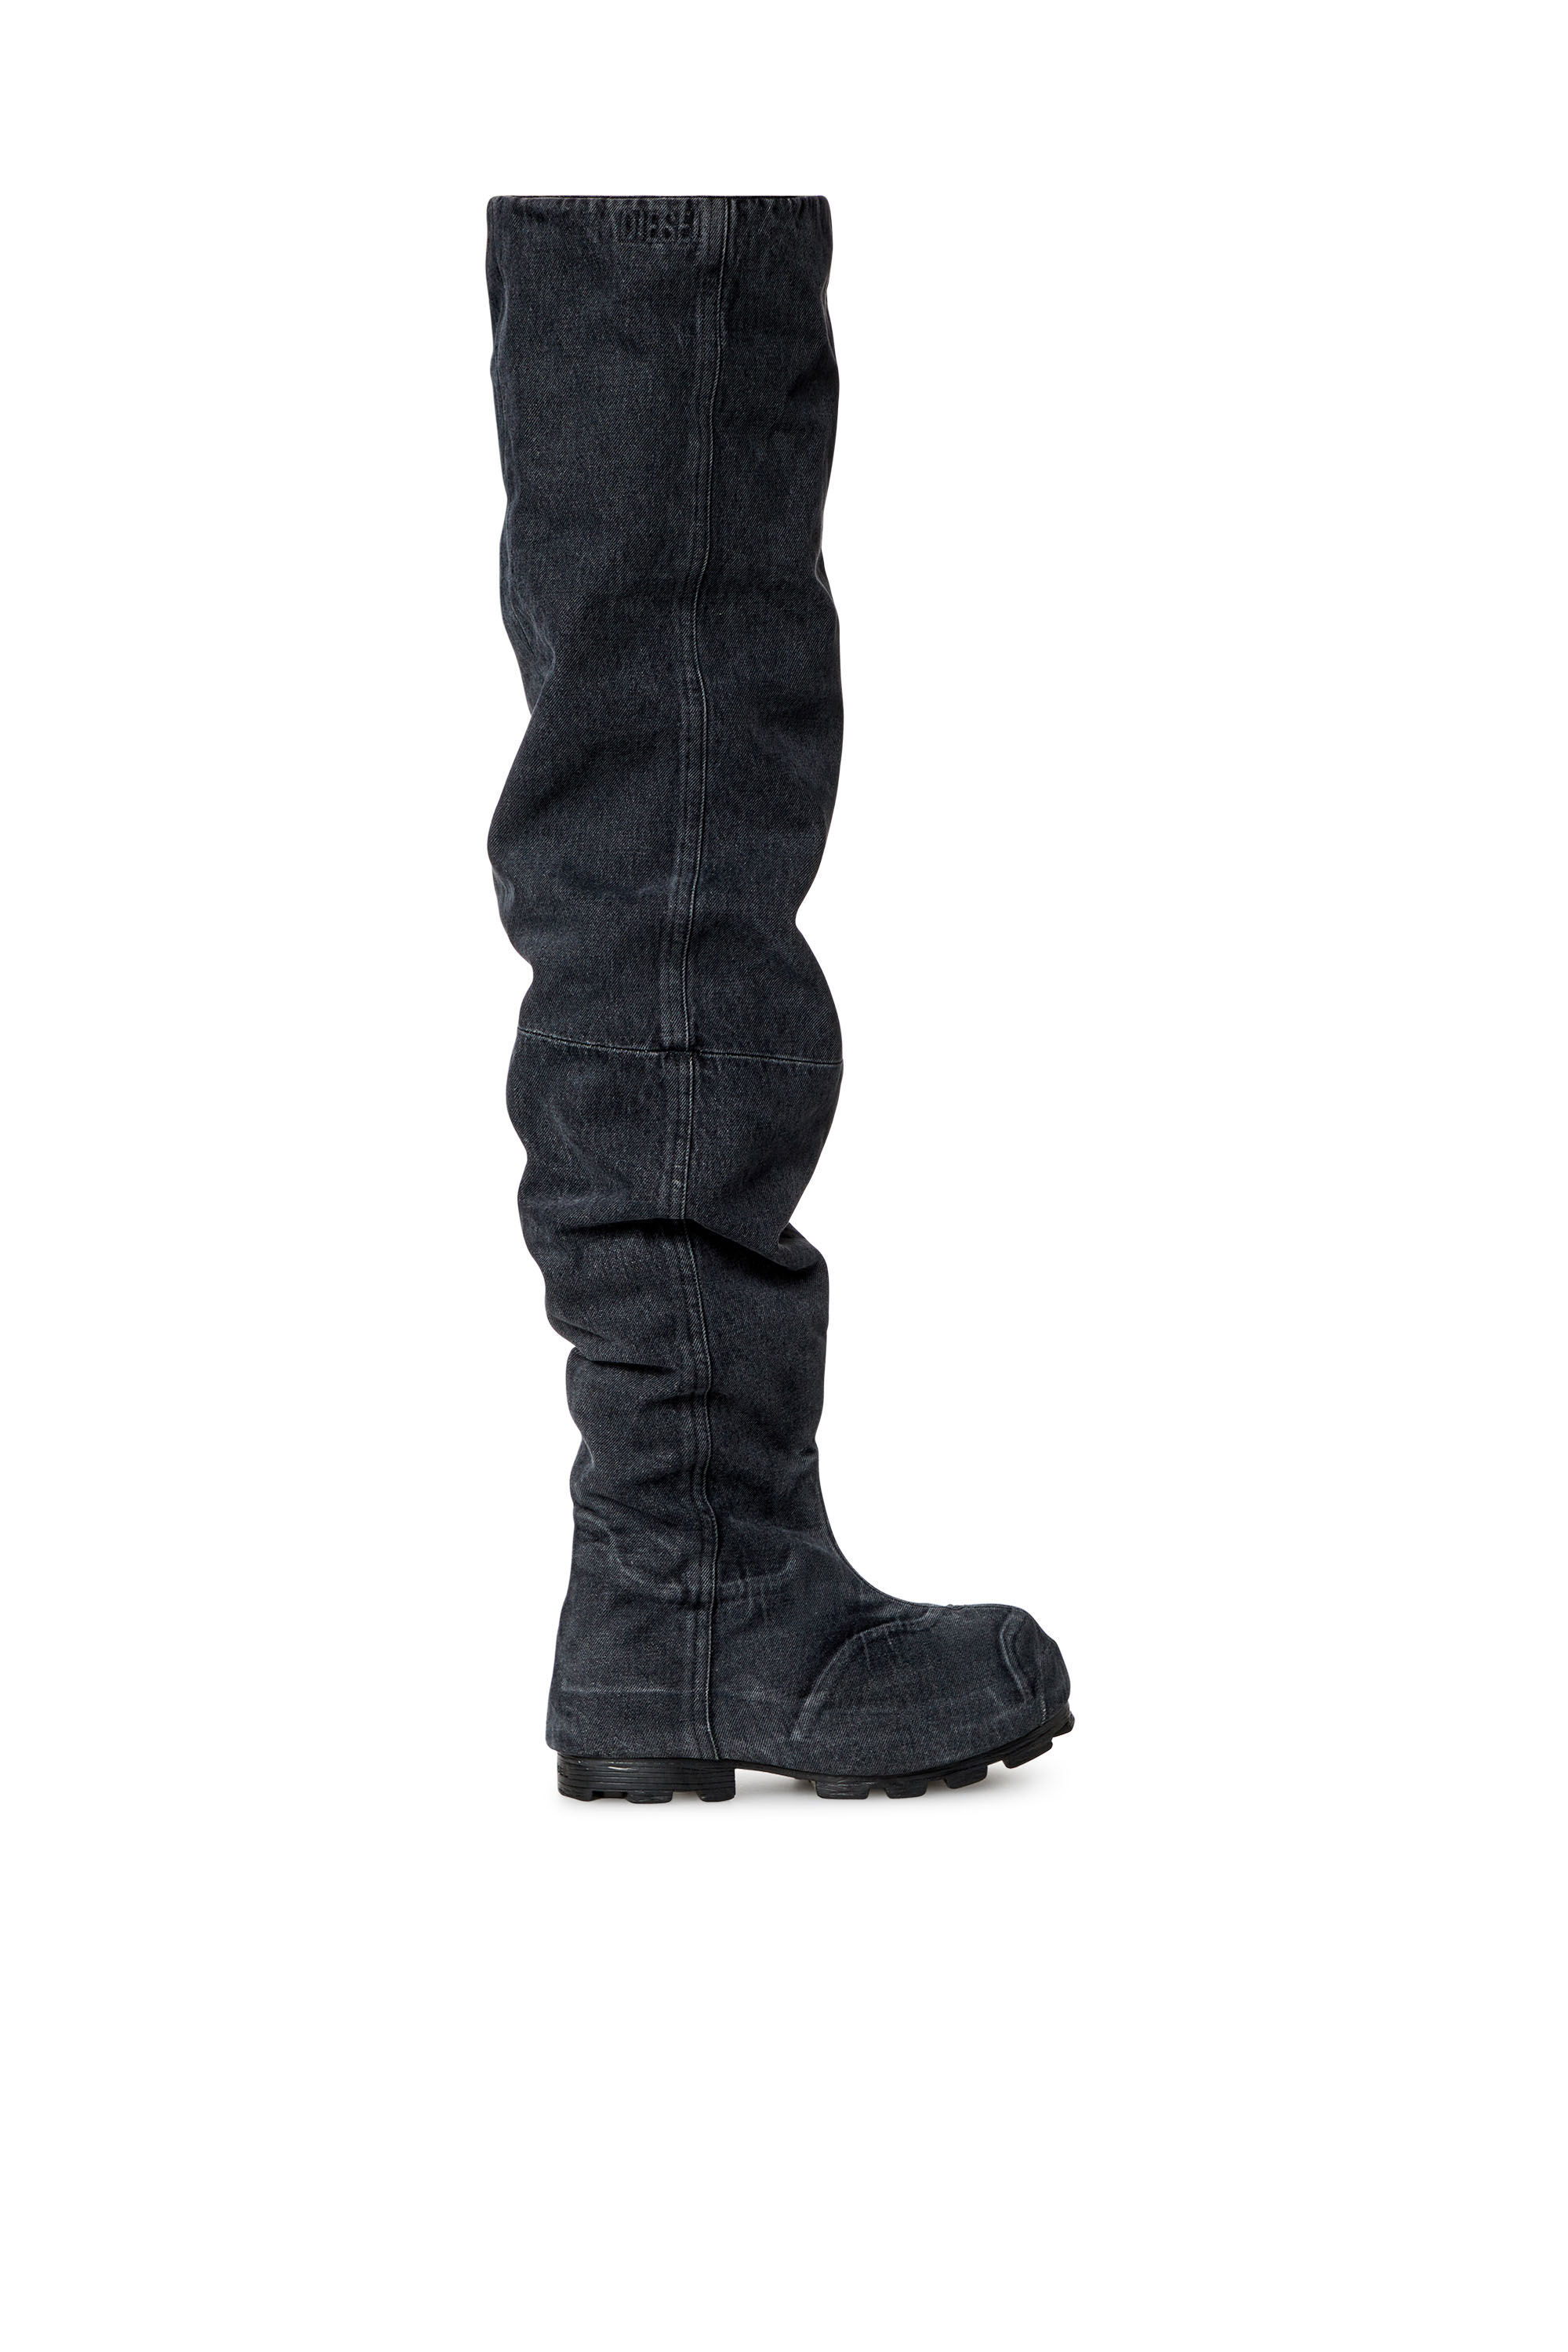 Men's D-Hammer Tbt Md Boots - Over-the-knee boots in washed denim 